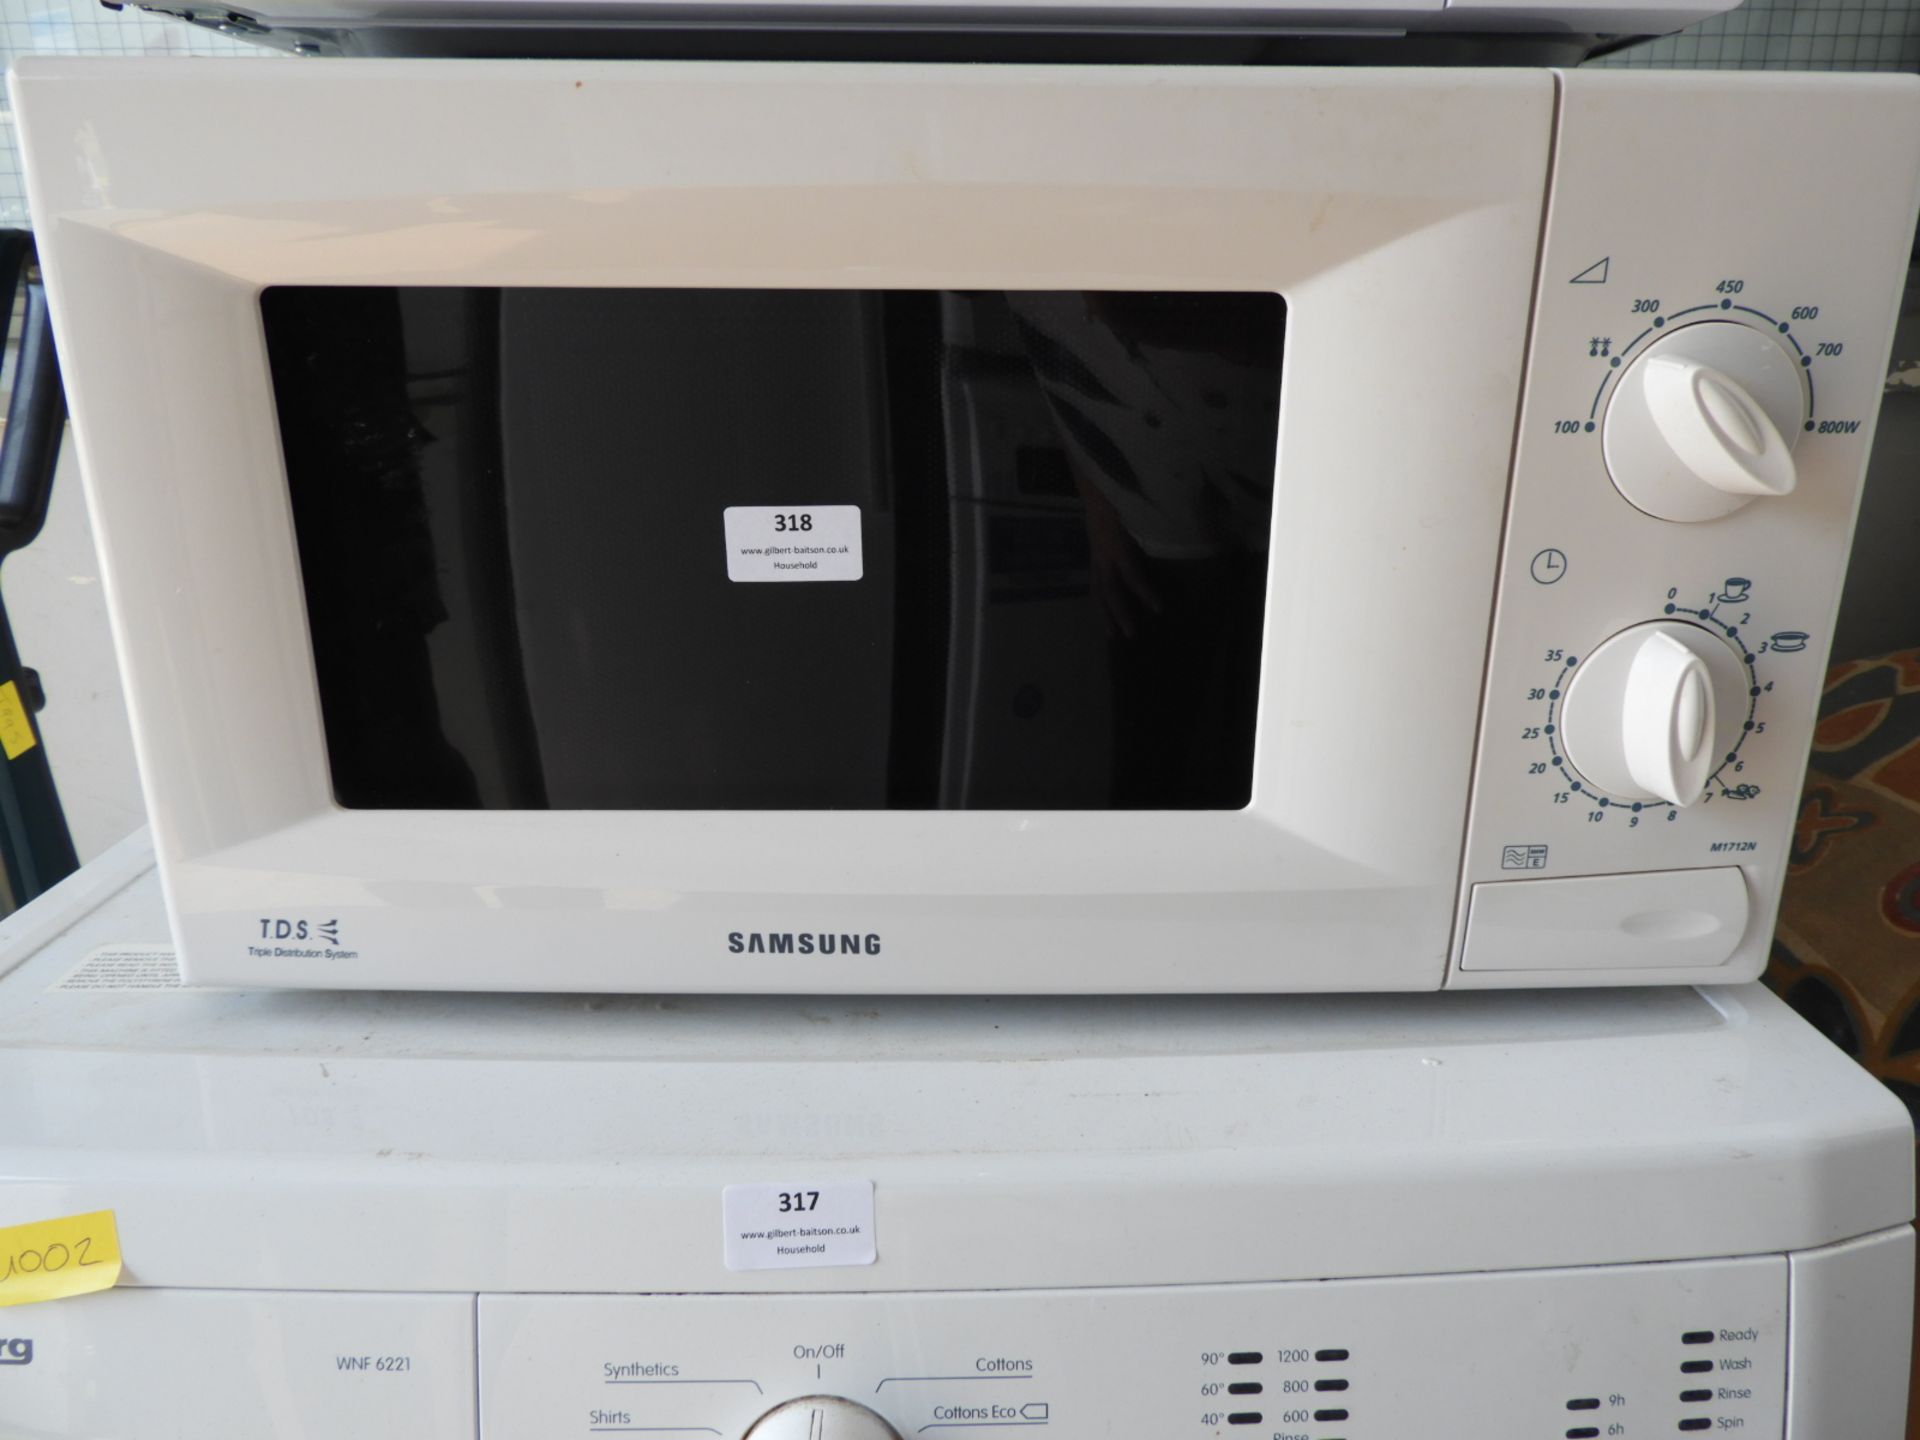 Samsung TDS Microwave Oven